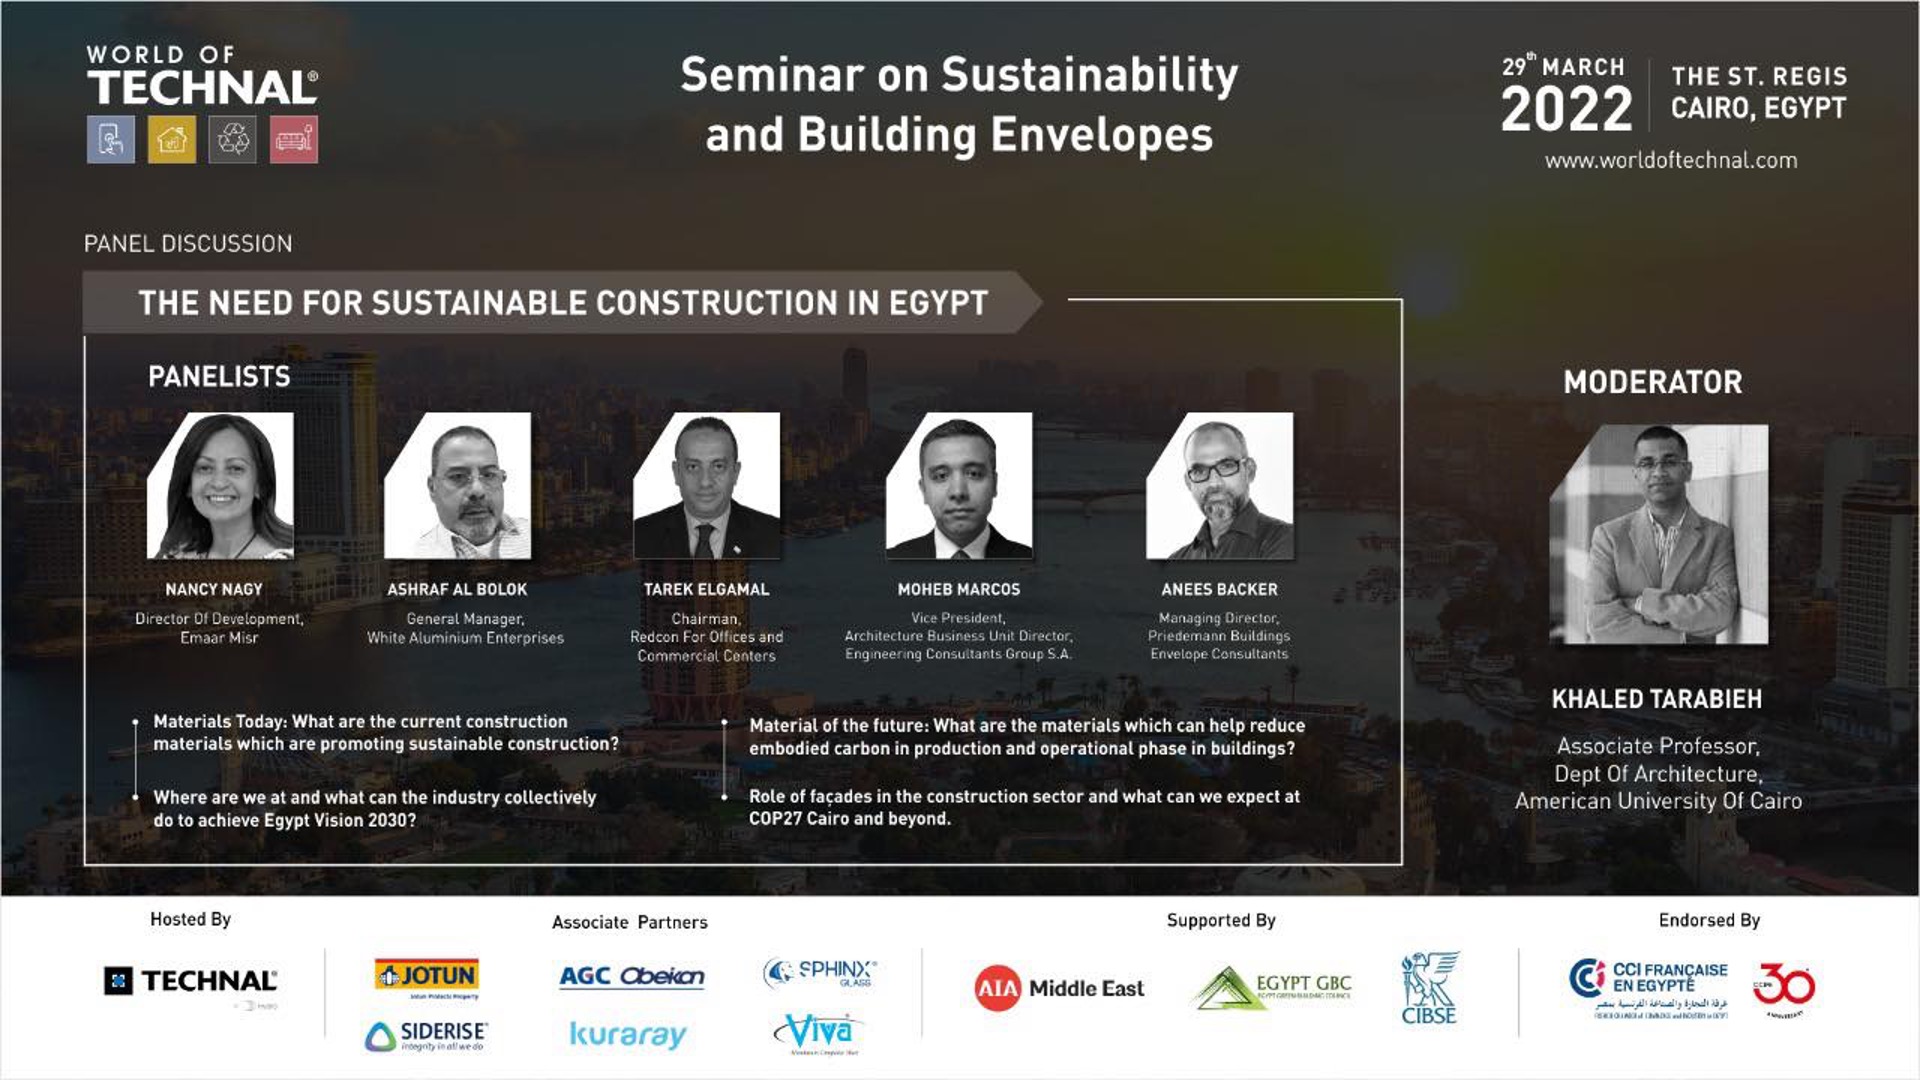 ROCC's participation in the TECHNAL Seminar on Sustainability